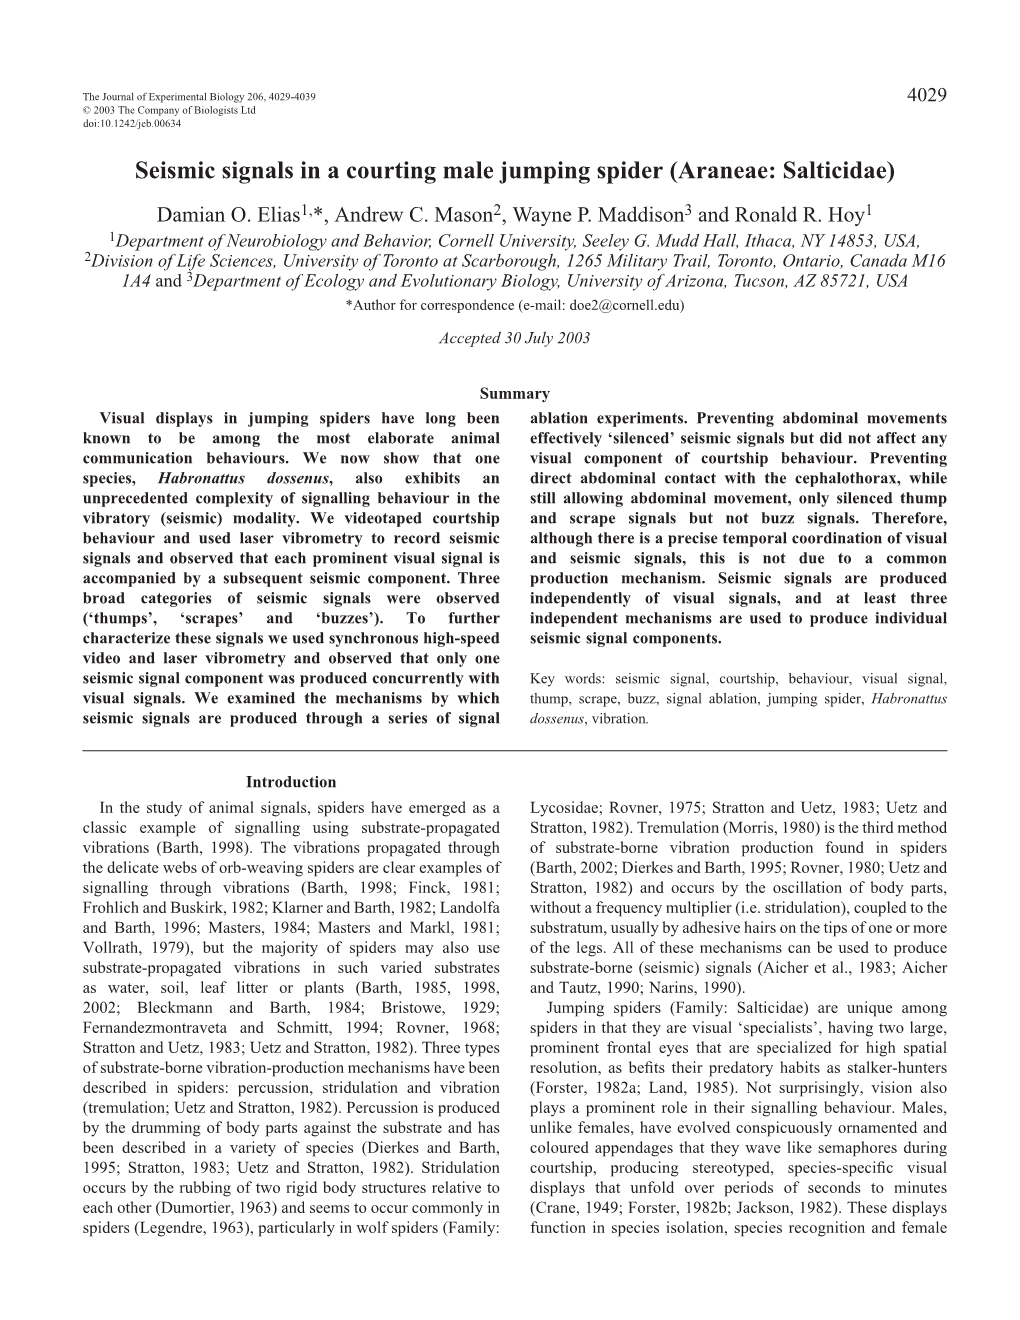 Seismic Signals in a Courting Male Jumping Spider (Araneae: Salticidae) Damian O